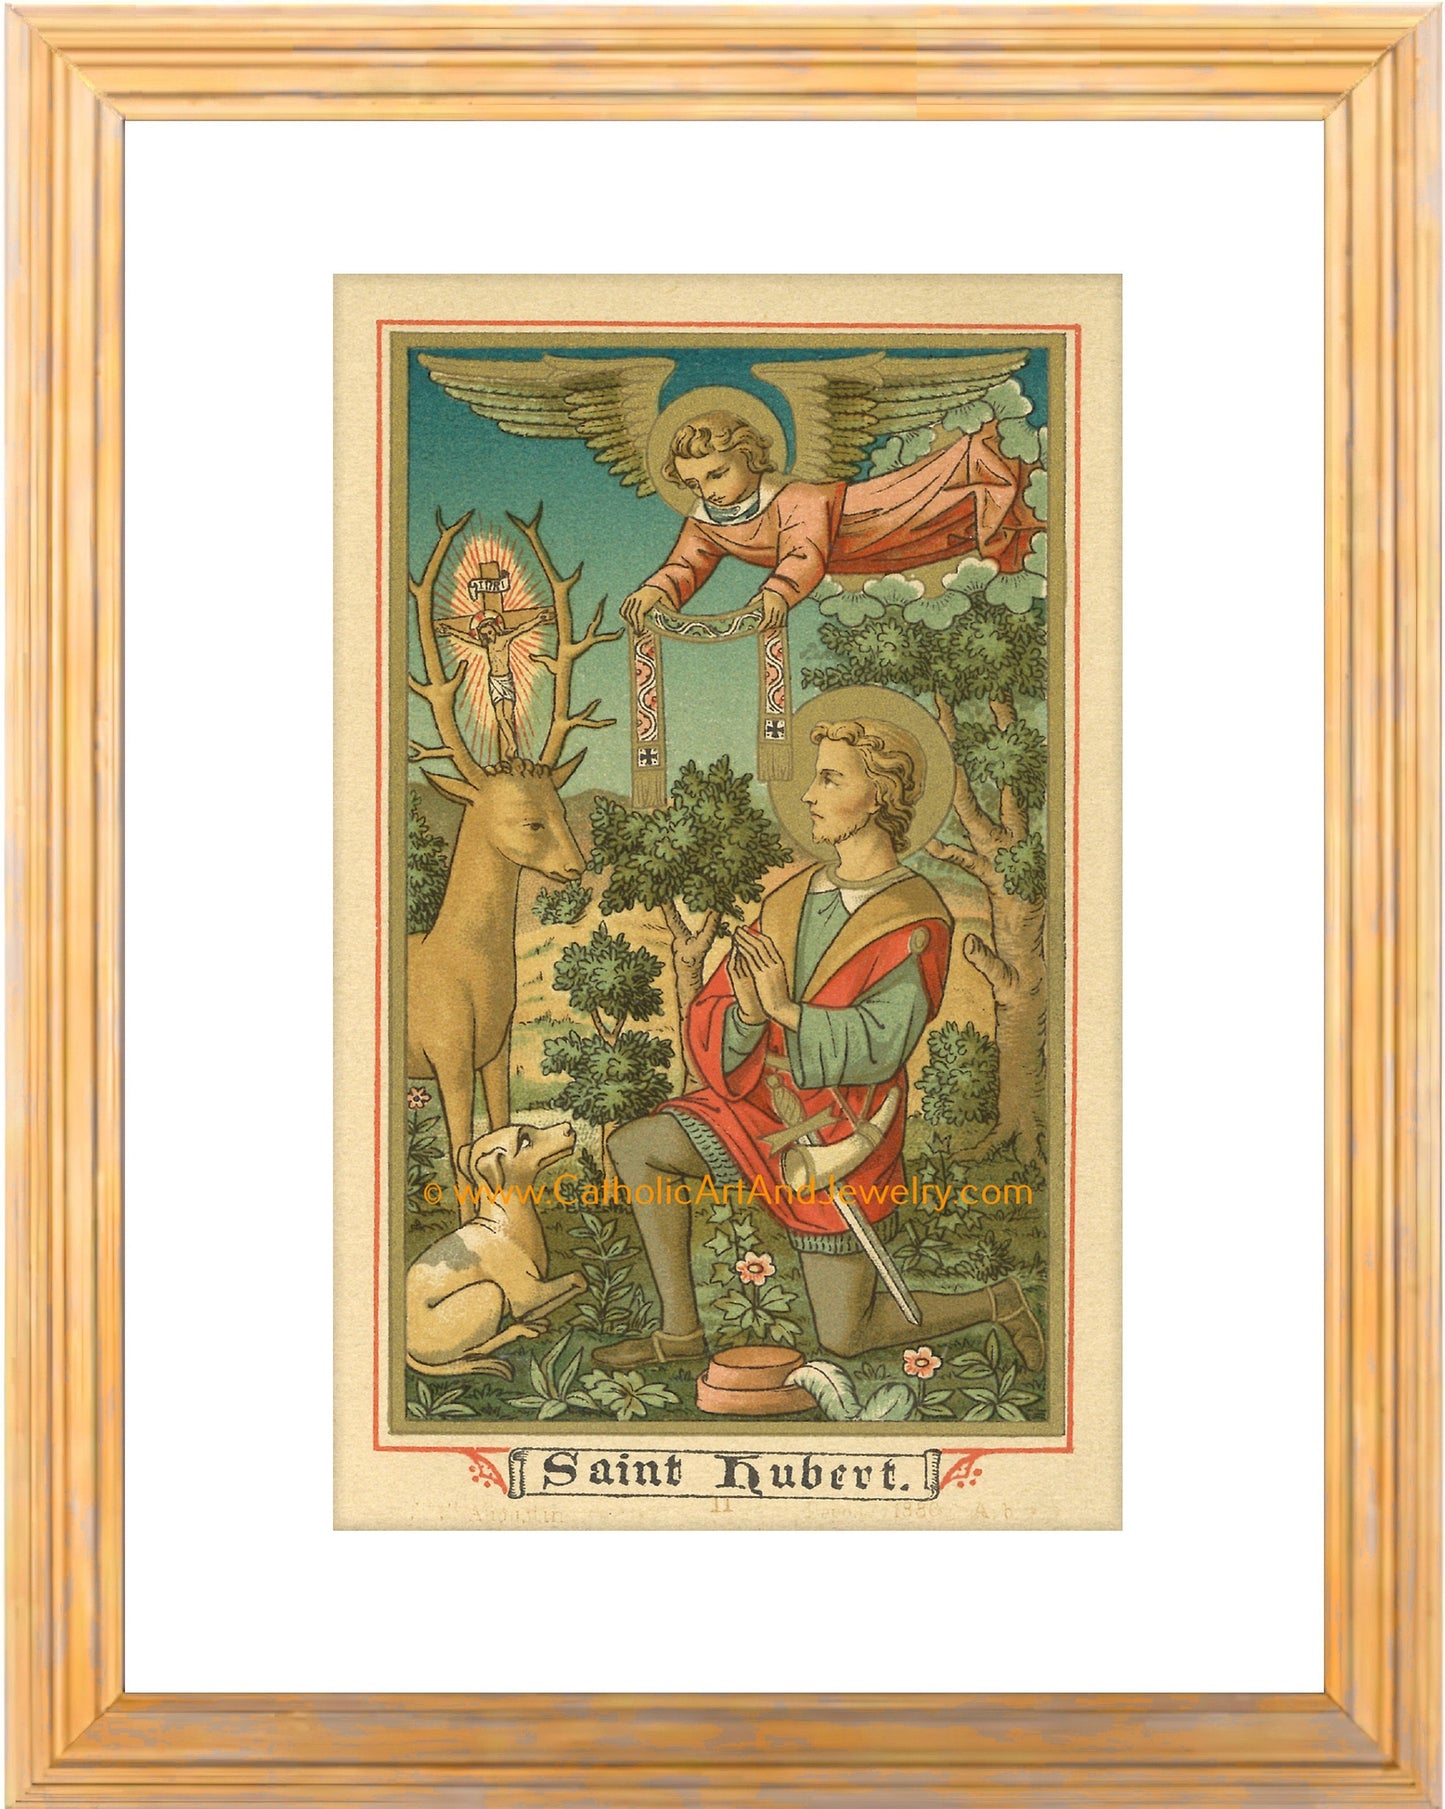 St. Hubert – Patron of Hunters – based on a Vintage Holy Card – Catholic Art Print – Archival Quality